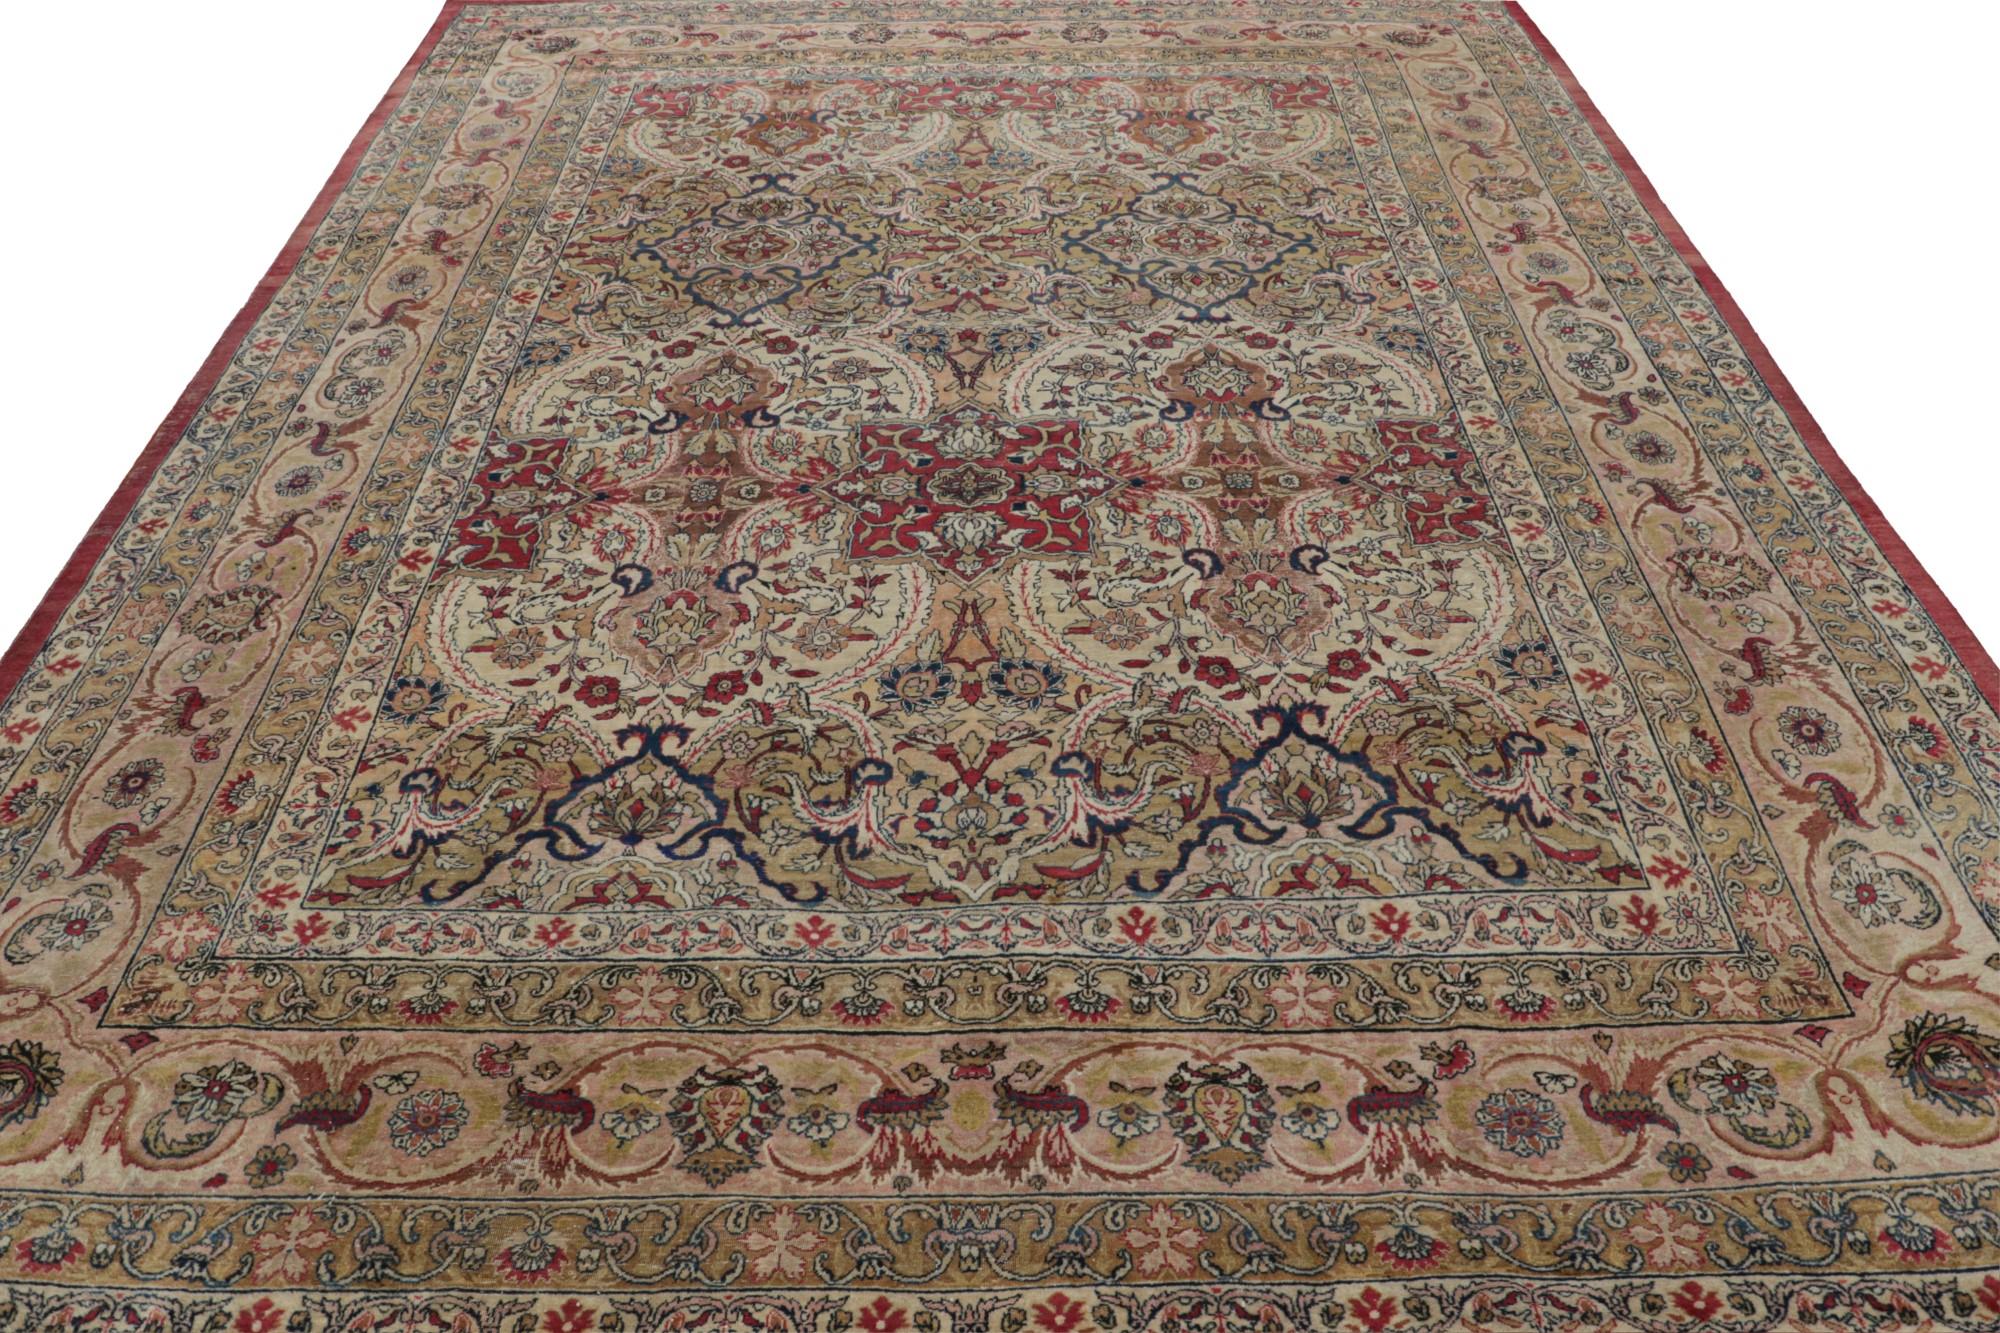 Hand-Woven Vintage Persian Kerman Lavar rug, with Floral Patterns, from Rug & Kilim For Sale